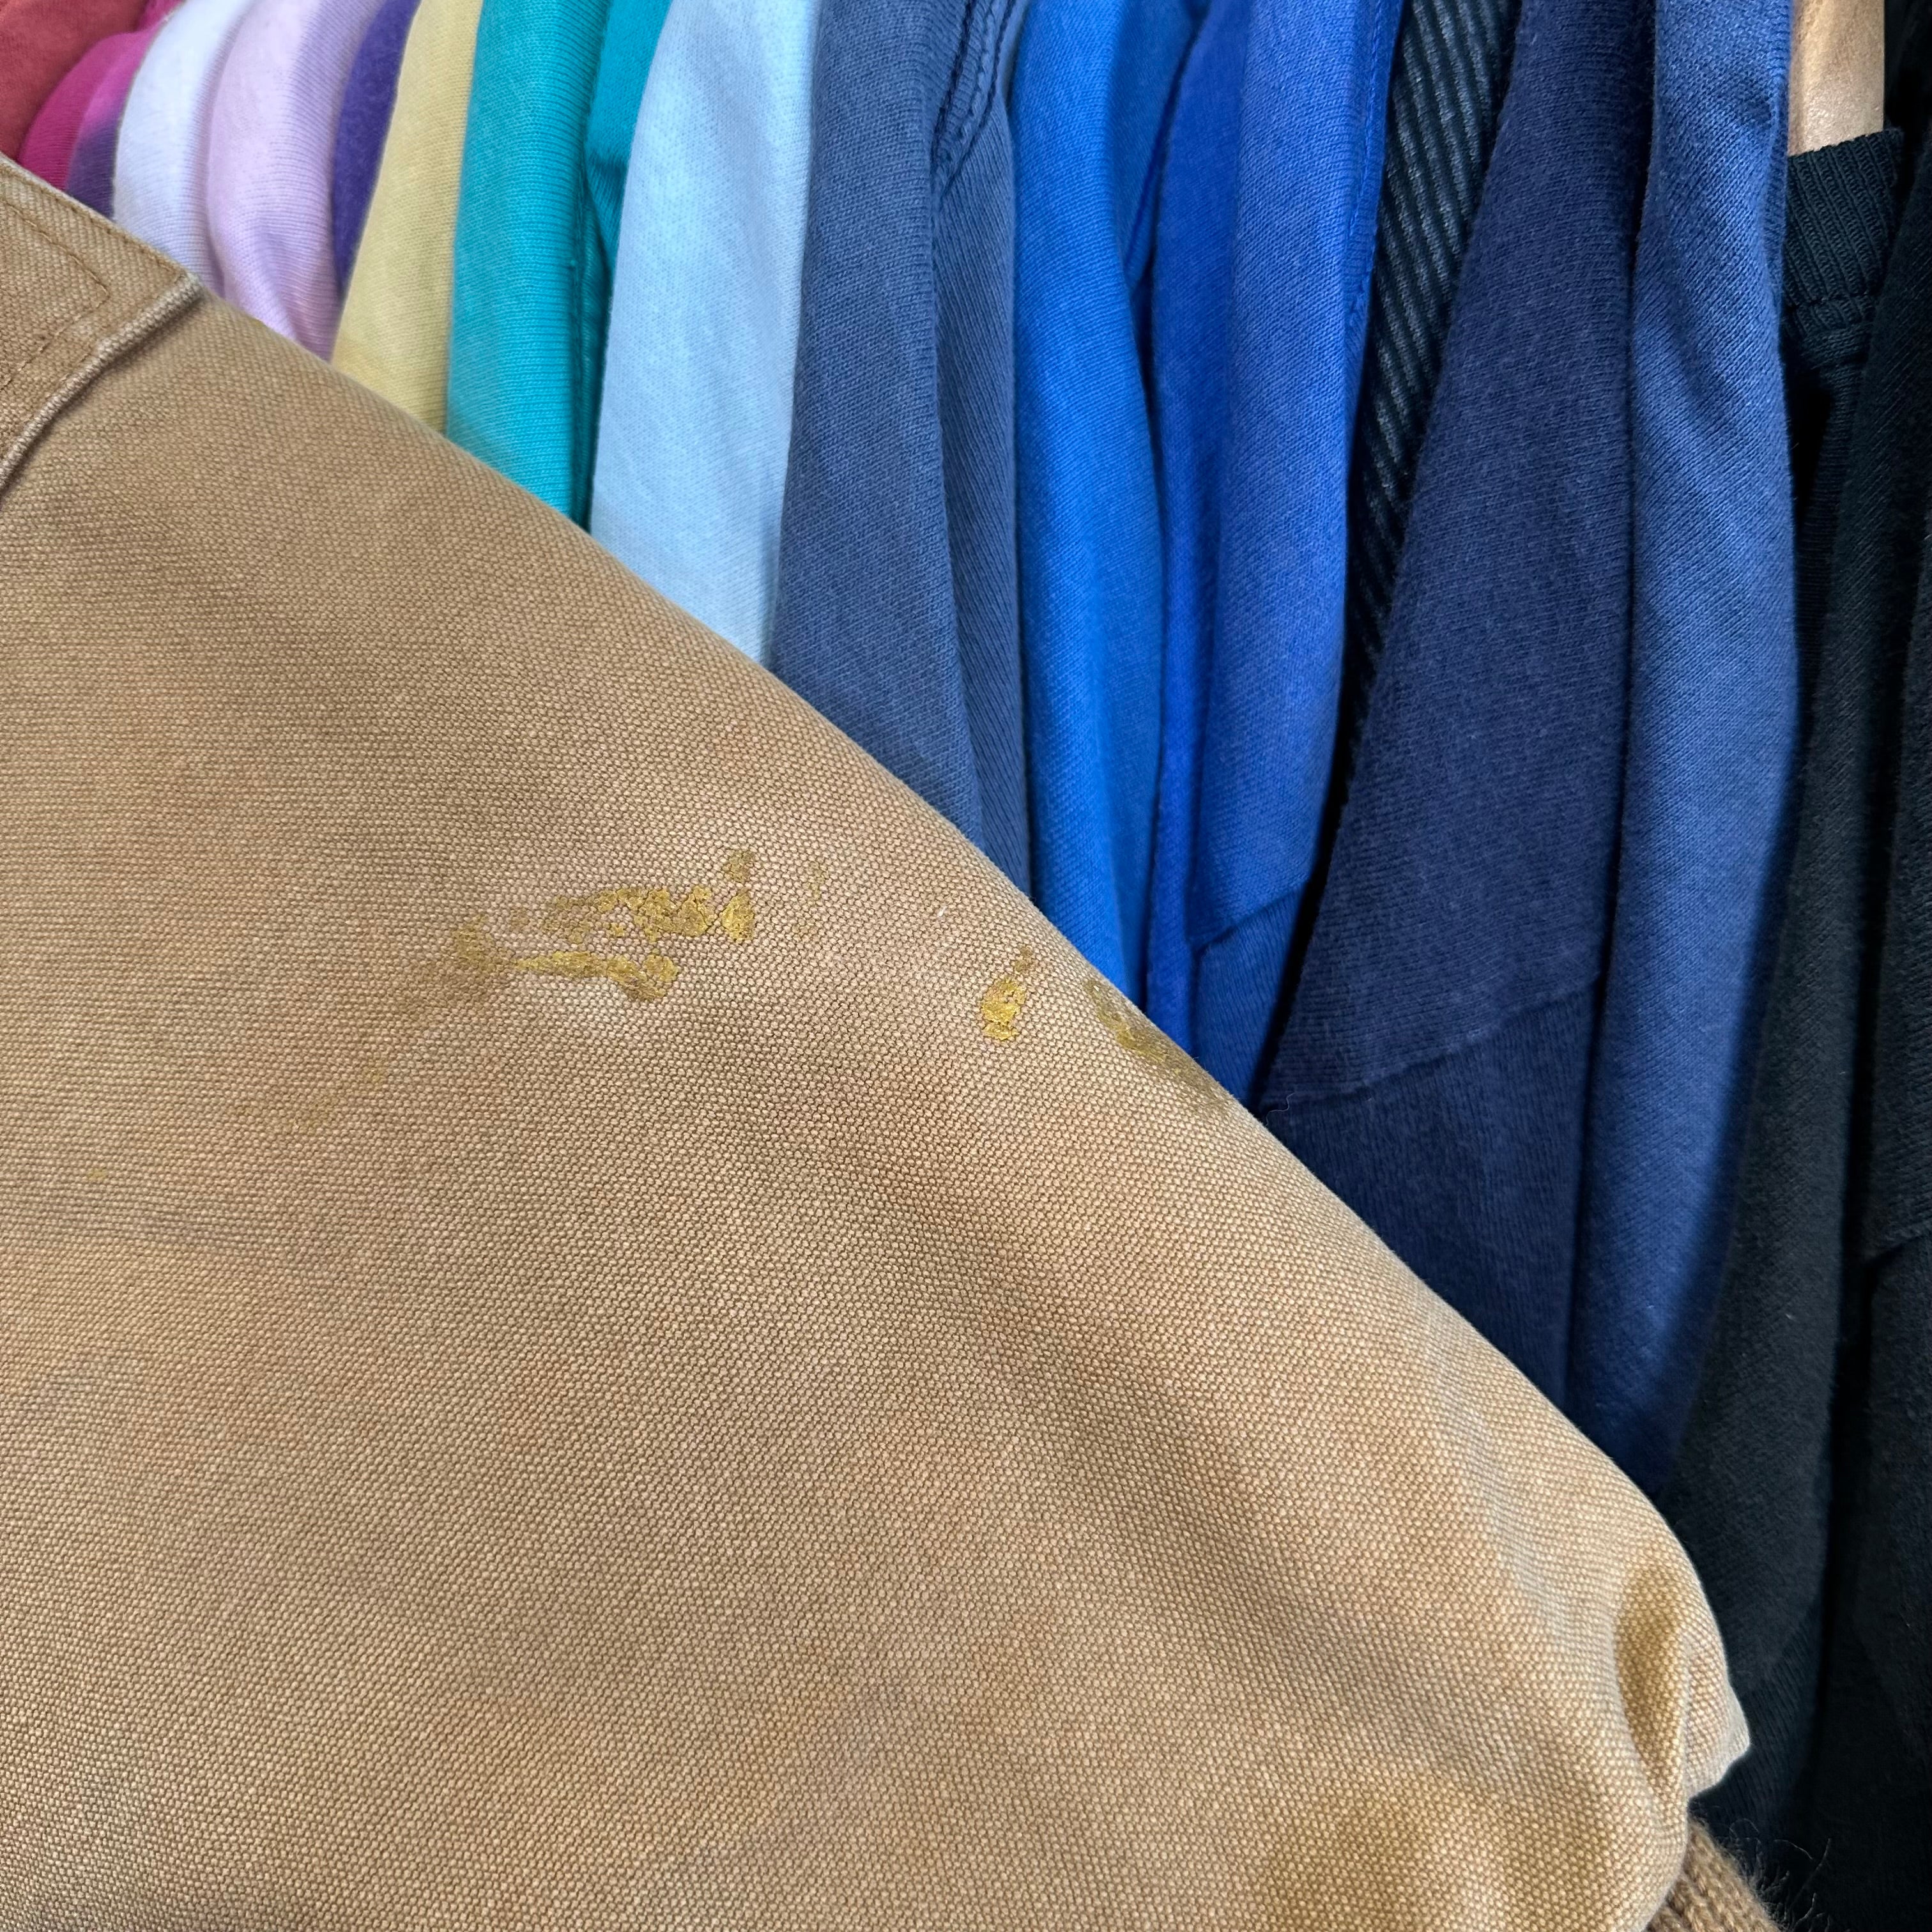 Old Mill Tan Hooded Work Jacket